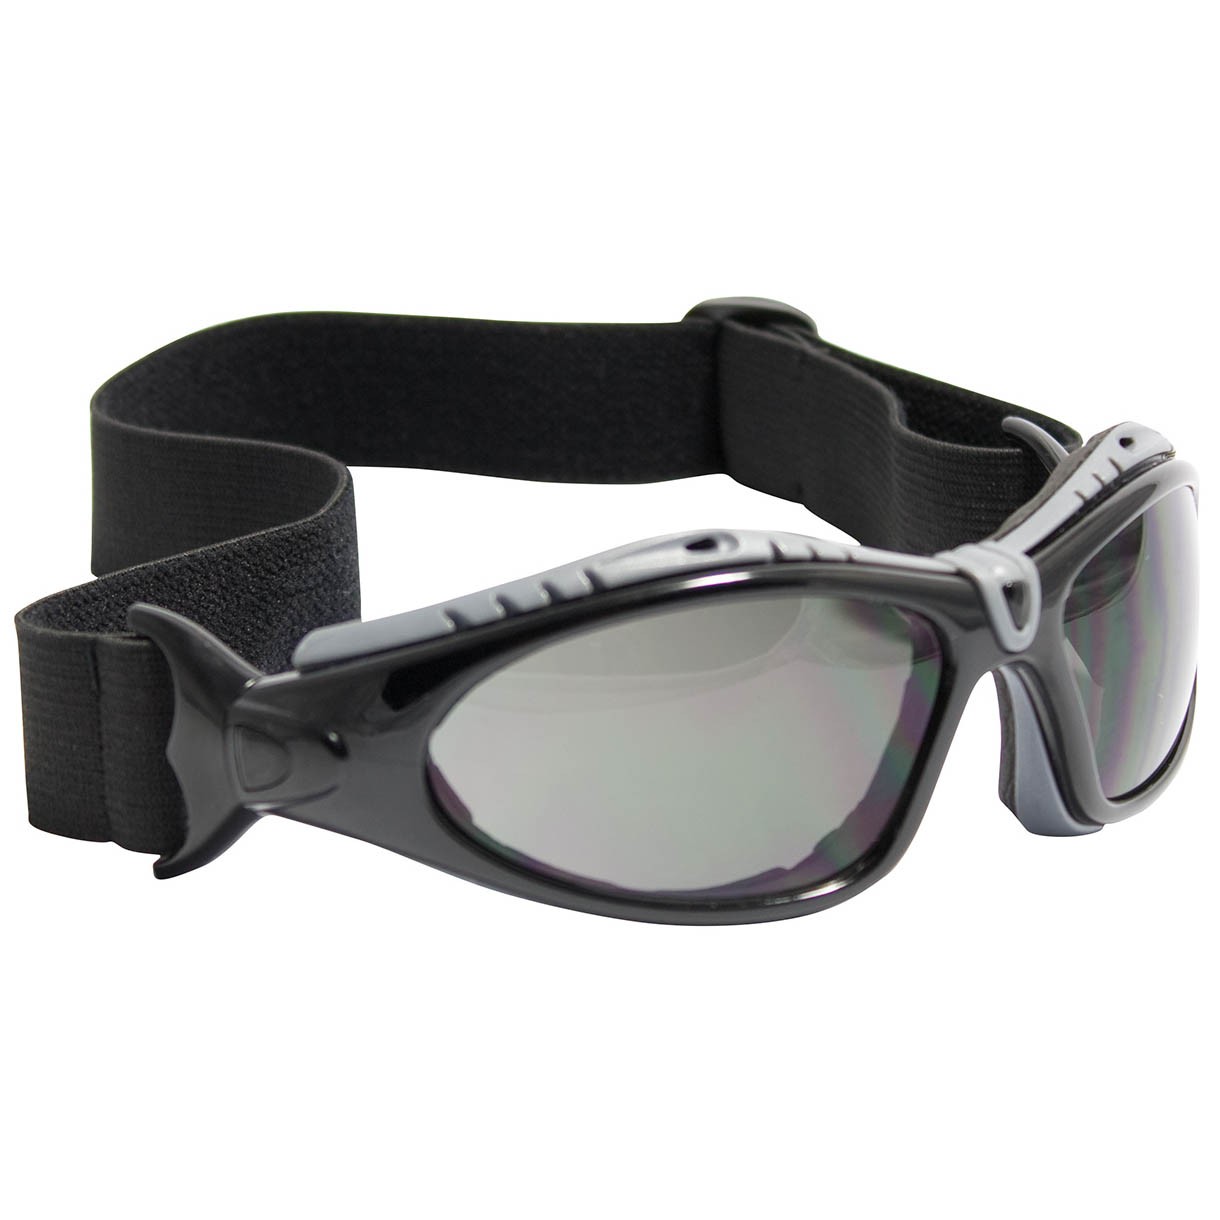 PIP 250-50-0521 Fuselage Full Frame Safety Glasses with Black Frame, Foam Padding, Gray Lens and Anti-Scratch/FogLess 3Sixty Coating PID-250 50 0521